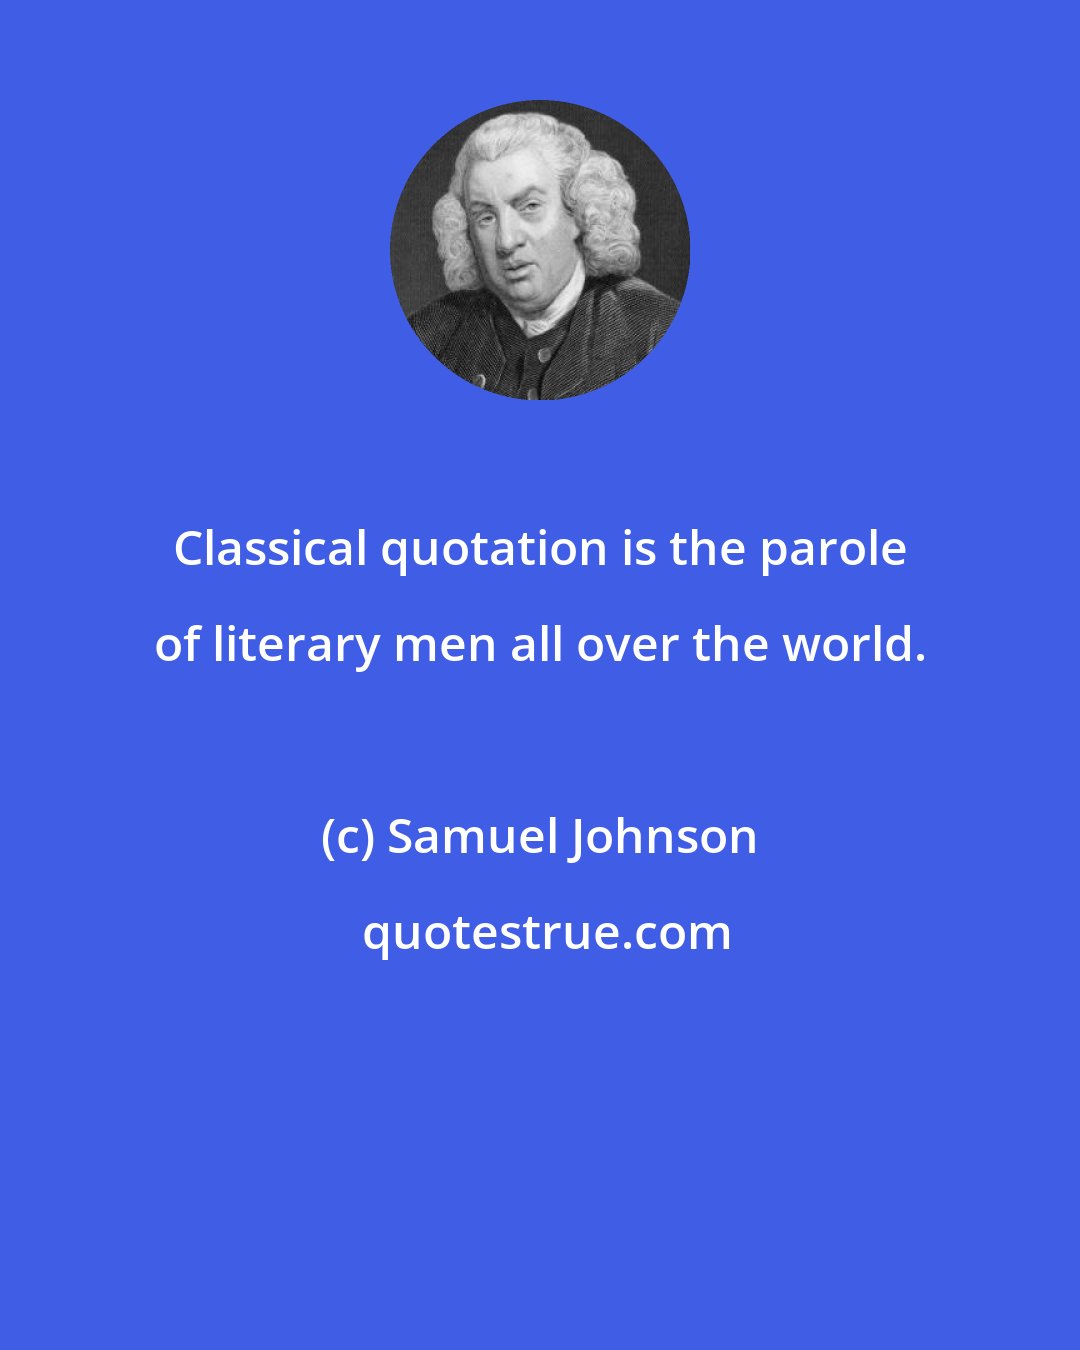 Samuel Johnson: Classical quotation is the parole of literary men all over the world.